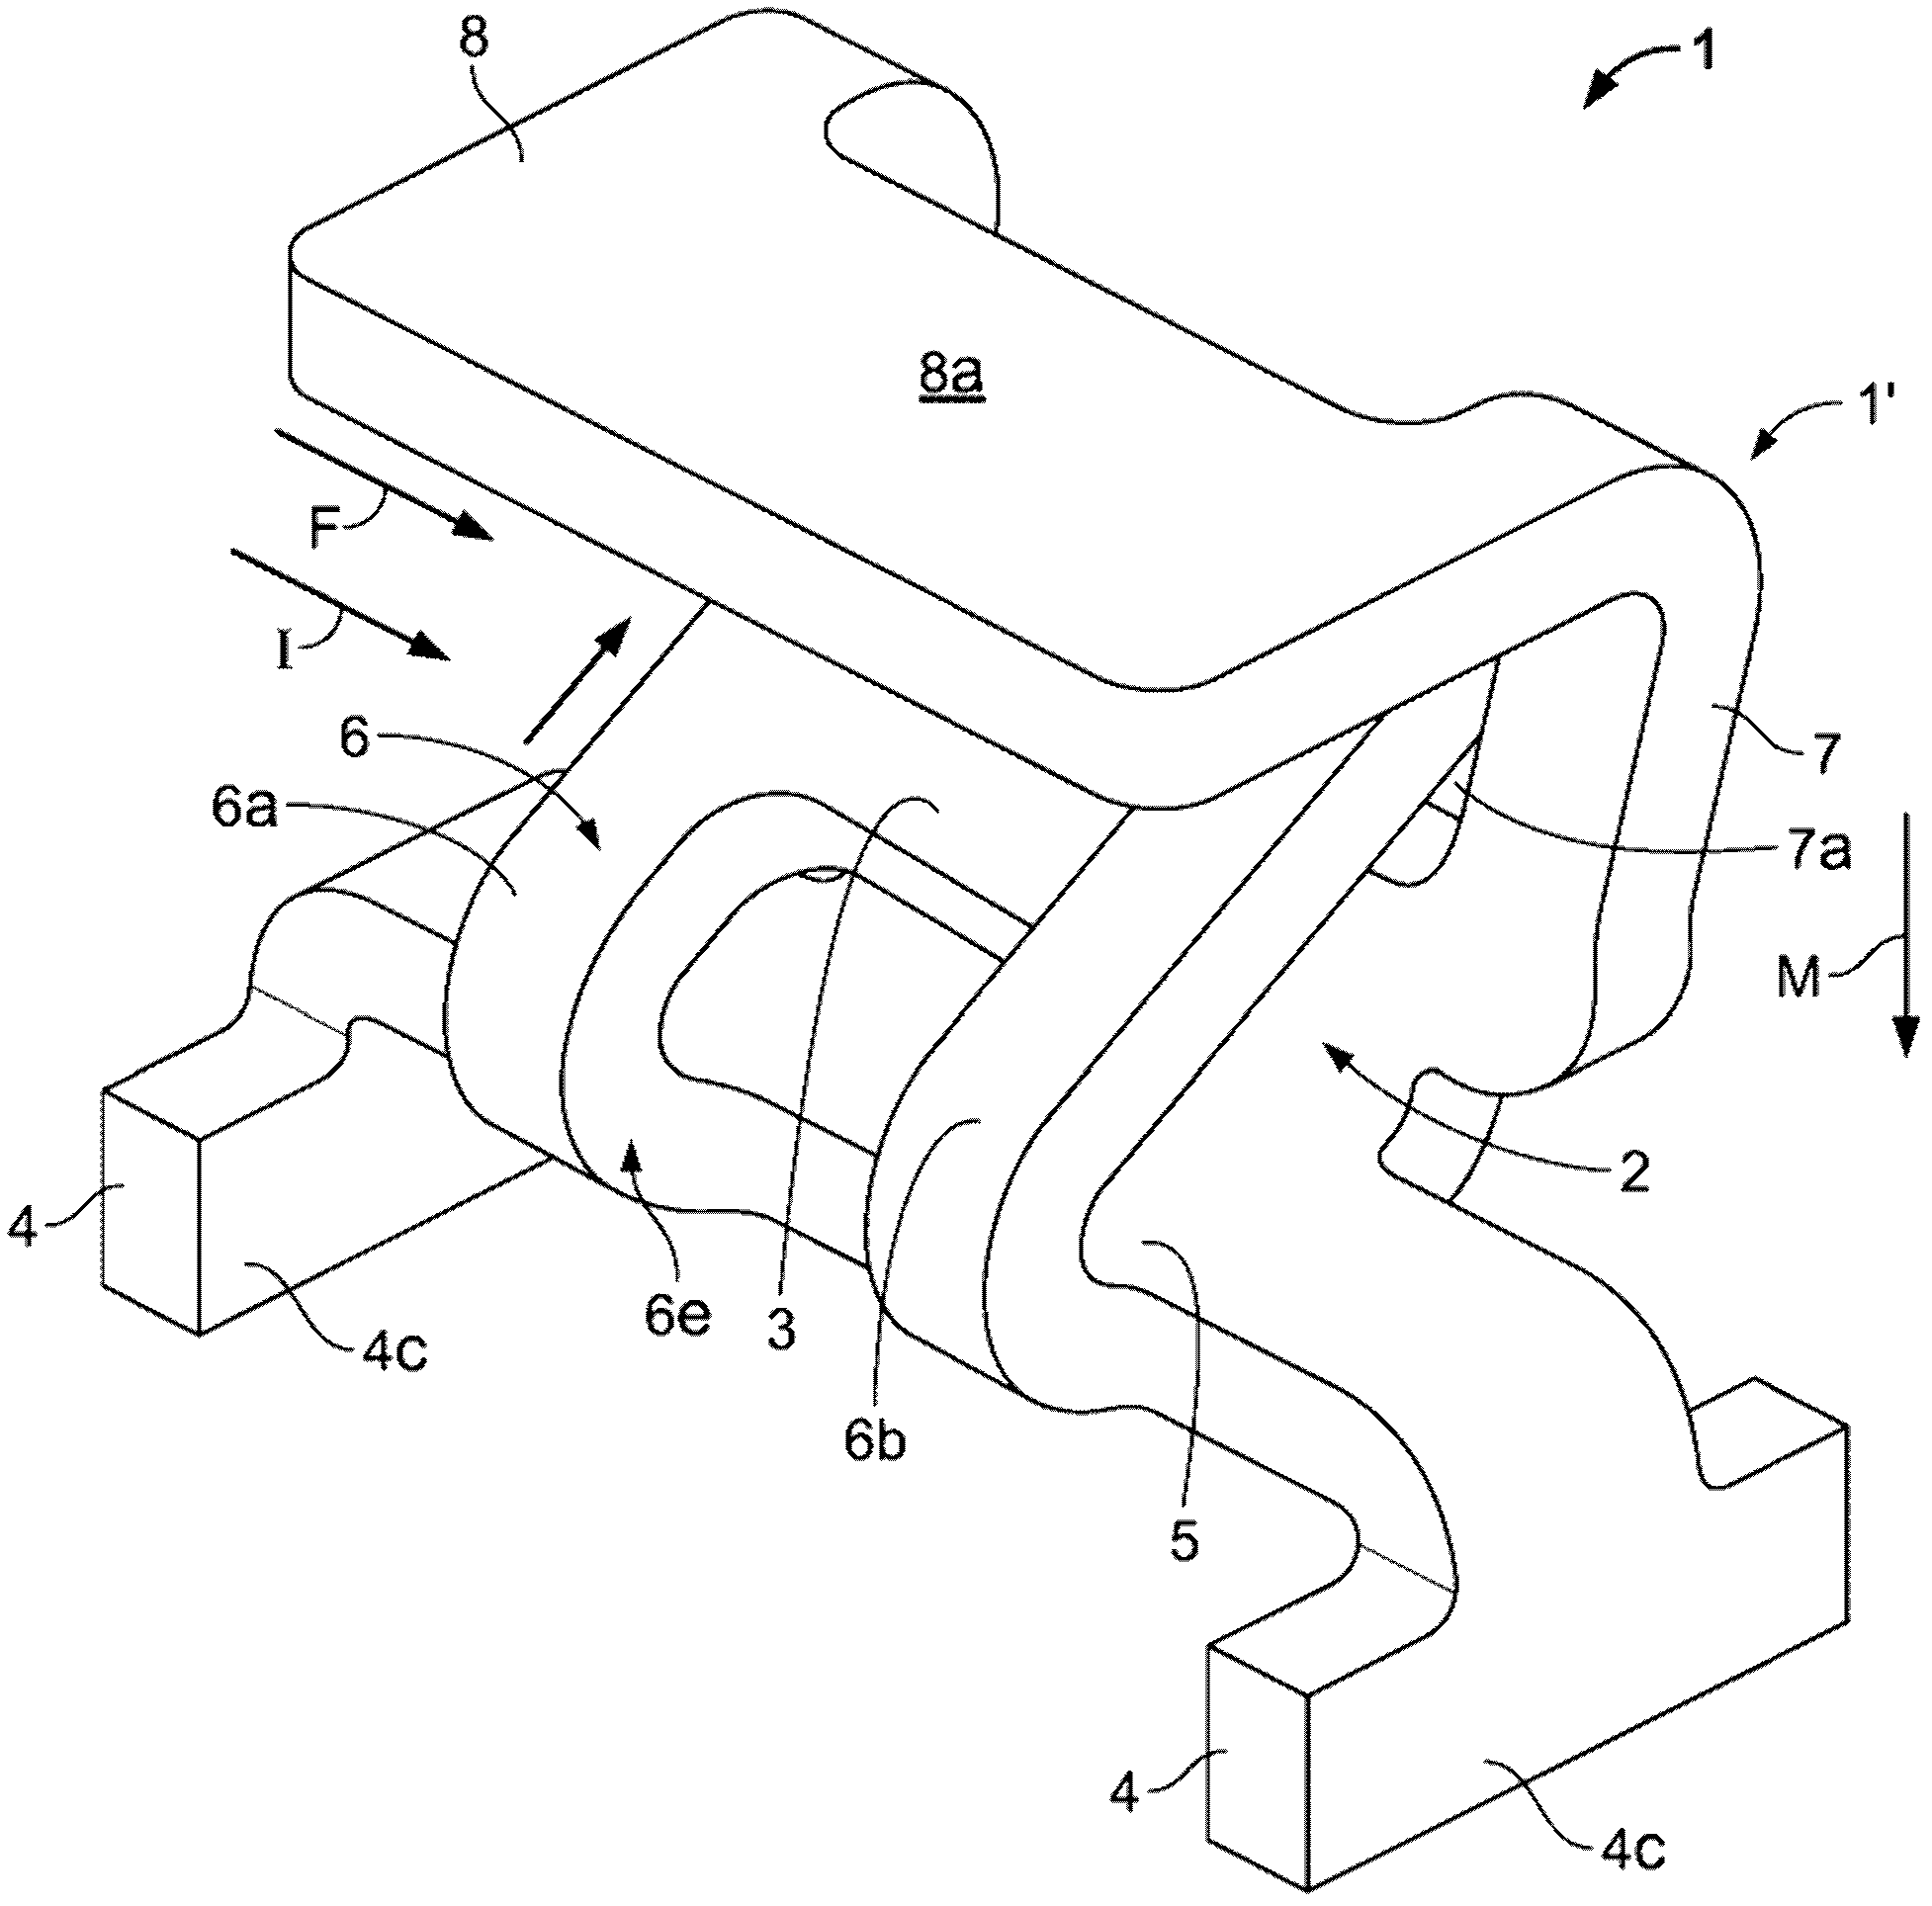 Terminal for connecting wires to printed circuit boards